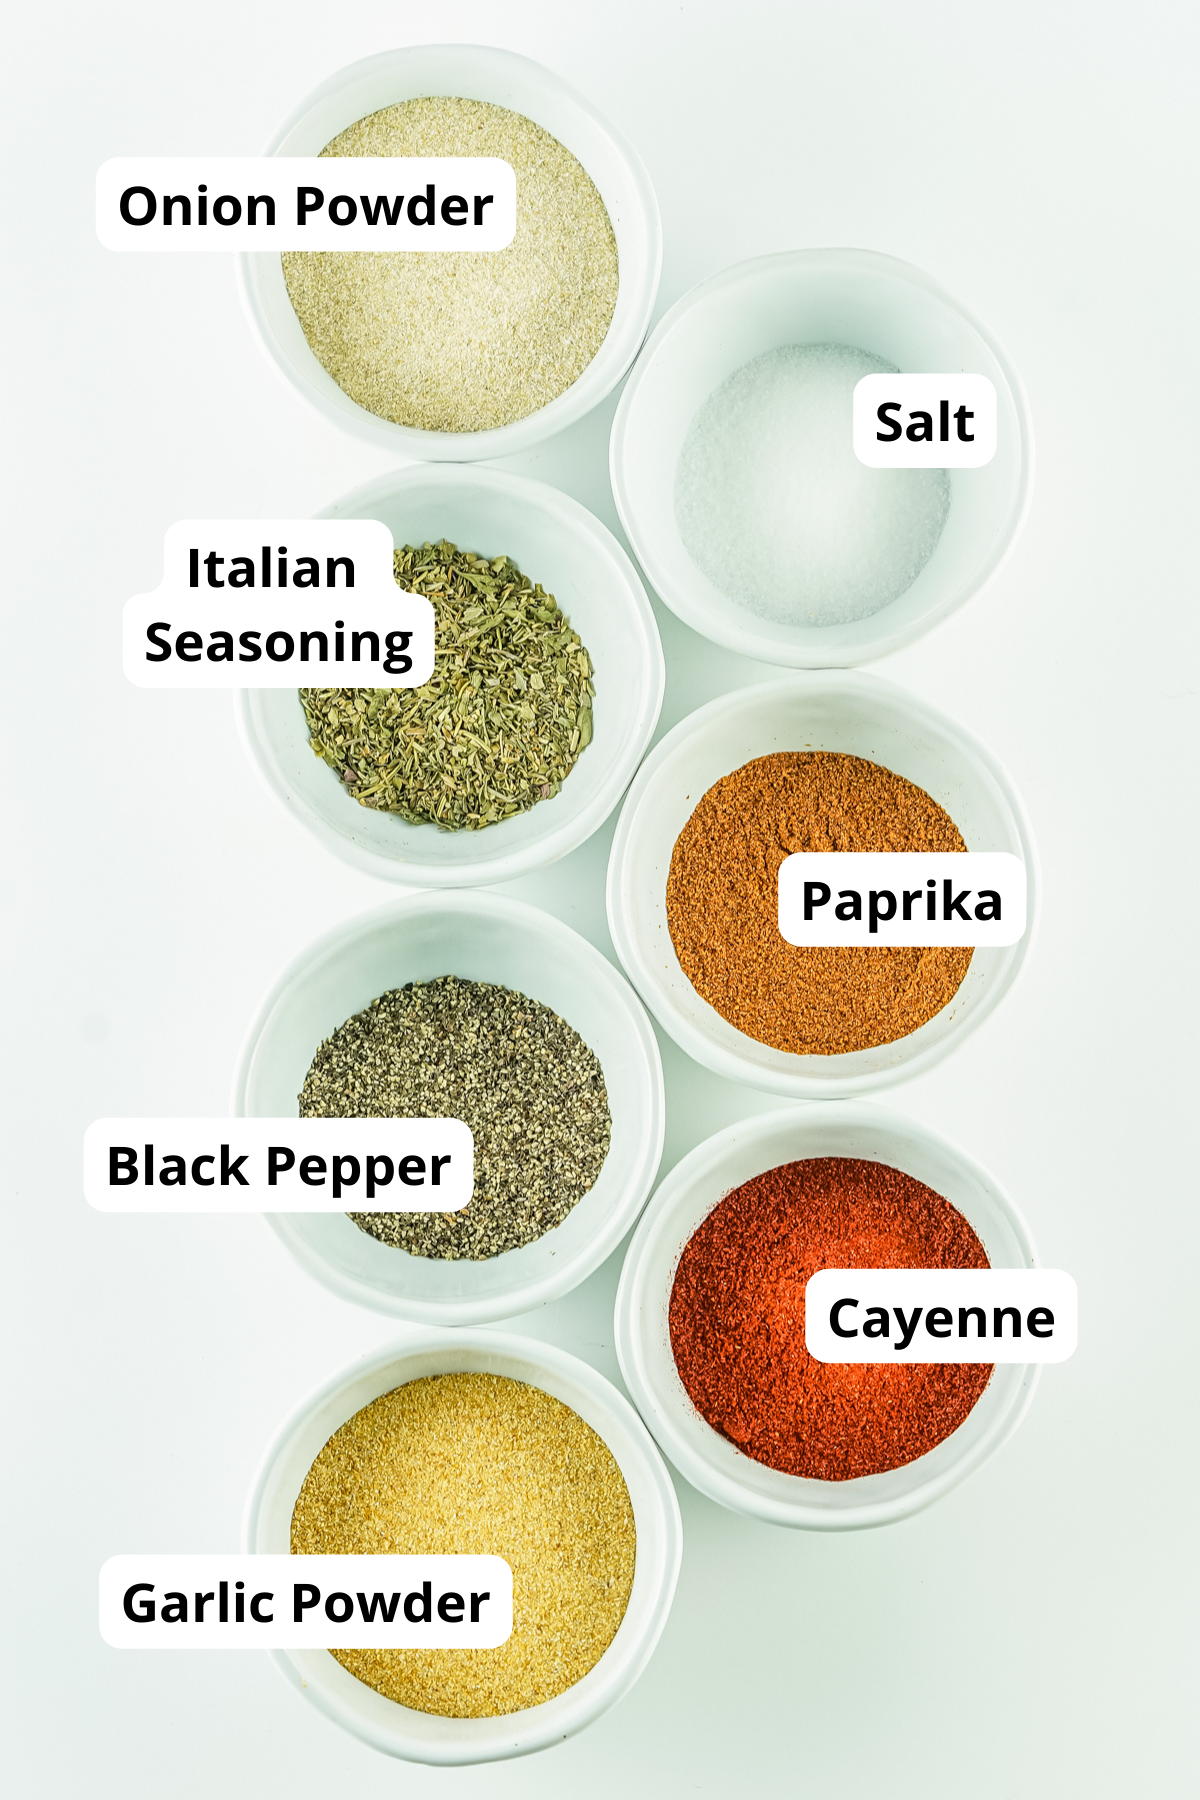 ingredients you will need to make this seasoning for chicken